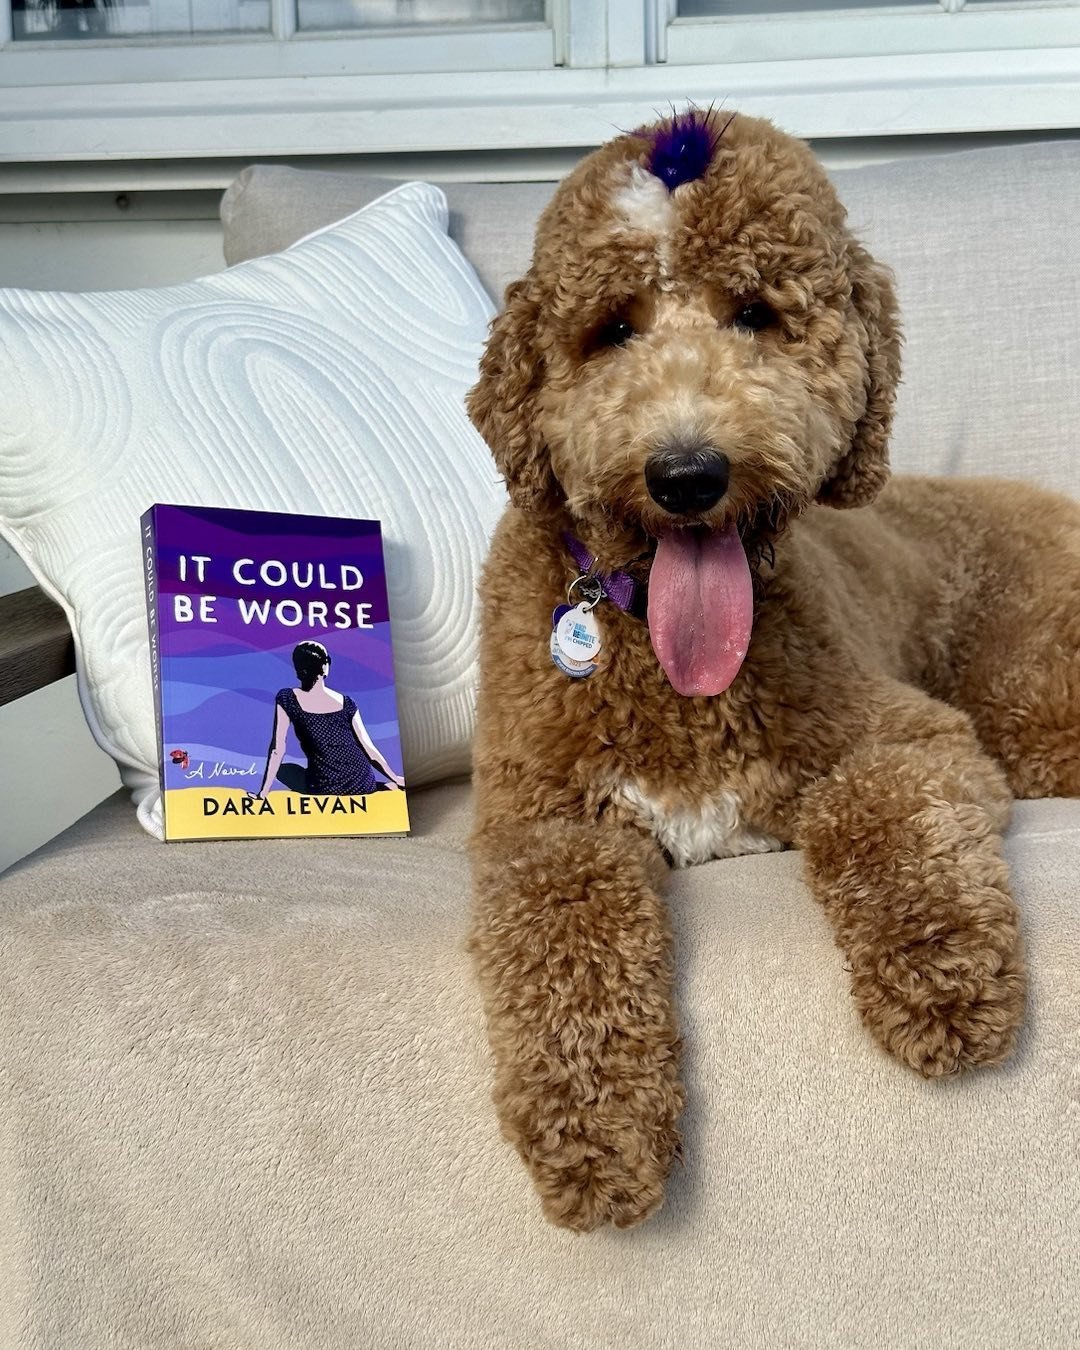 Melody is hanging out with my book baby today! Have you read it yet? 💜 

She said, &ldquo;Check it out&mdash;there are dogs in the story! Themes about motherhood, friendship, and unconditional love. Woof!&rdquo; 
.
.
.
#mustread #sundayfunday #readi